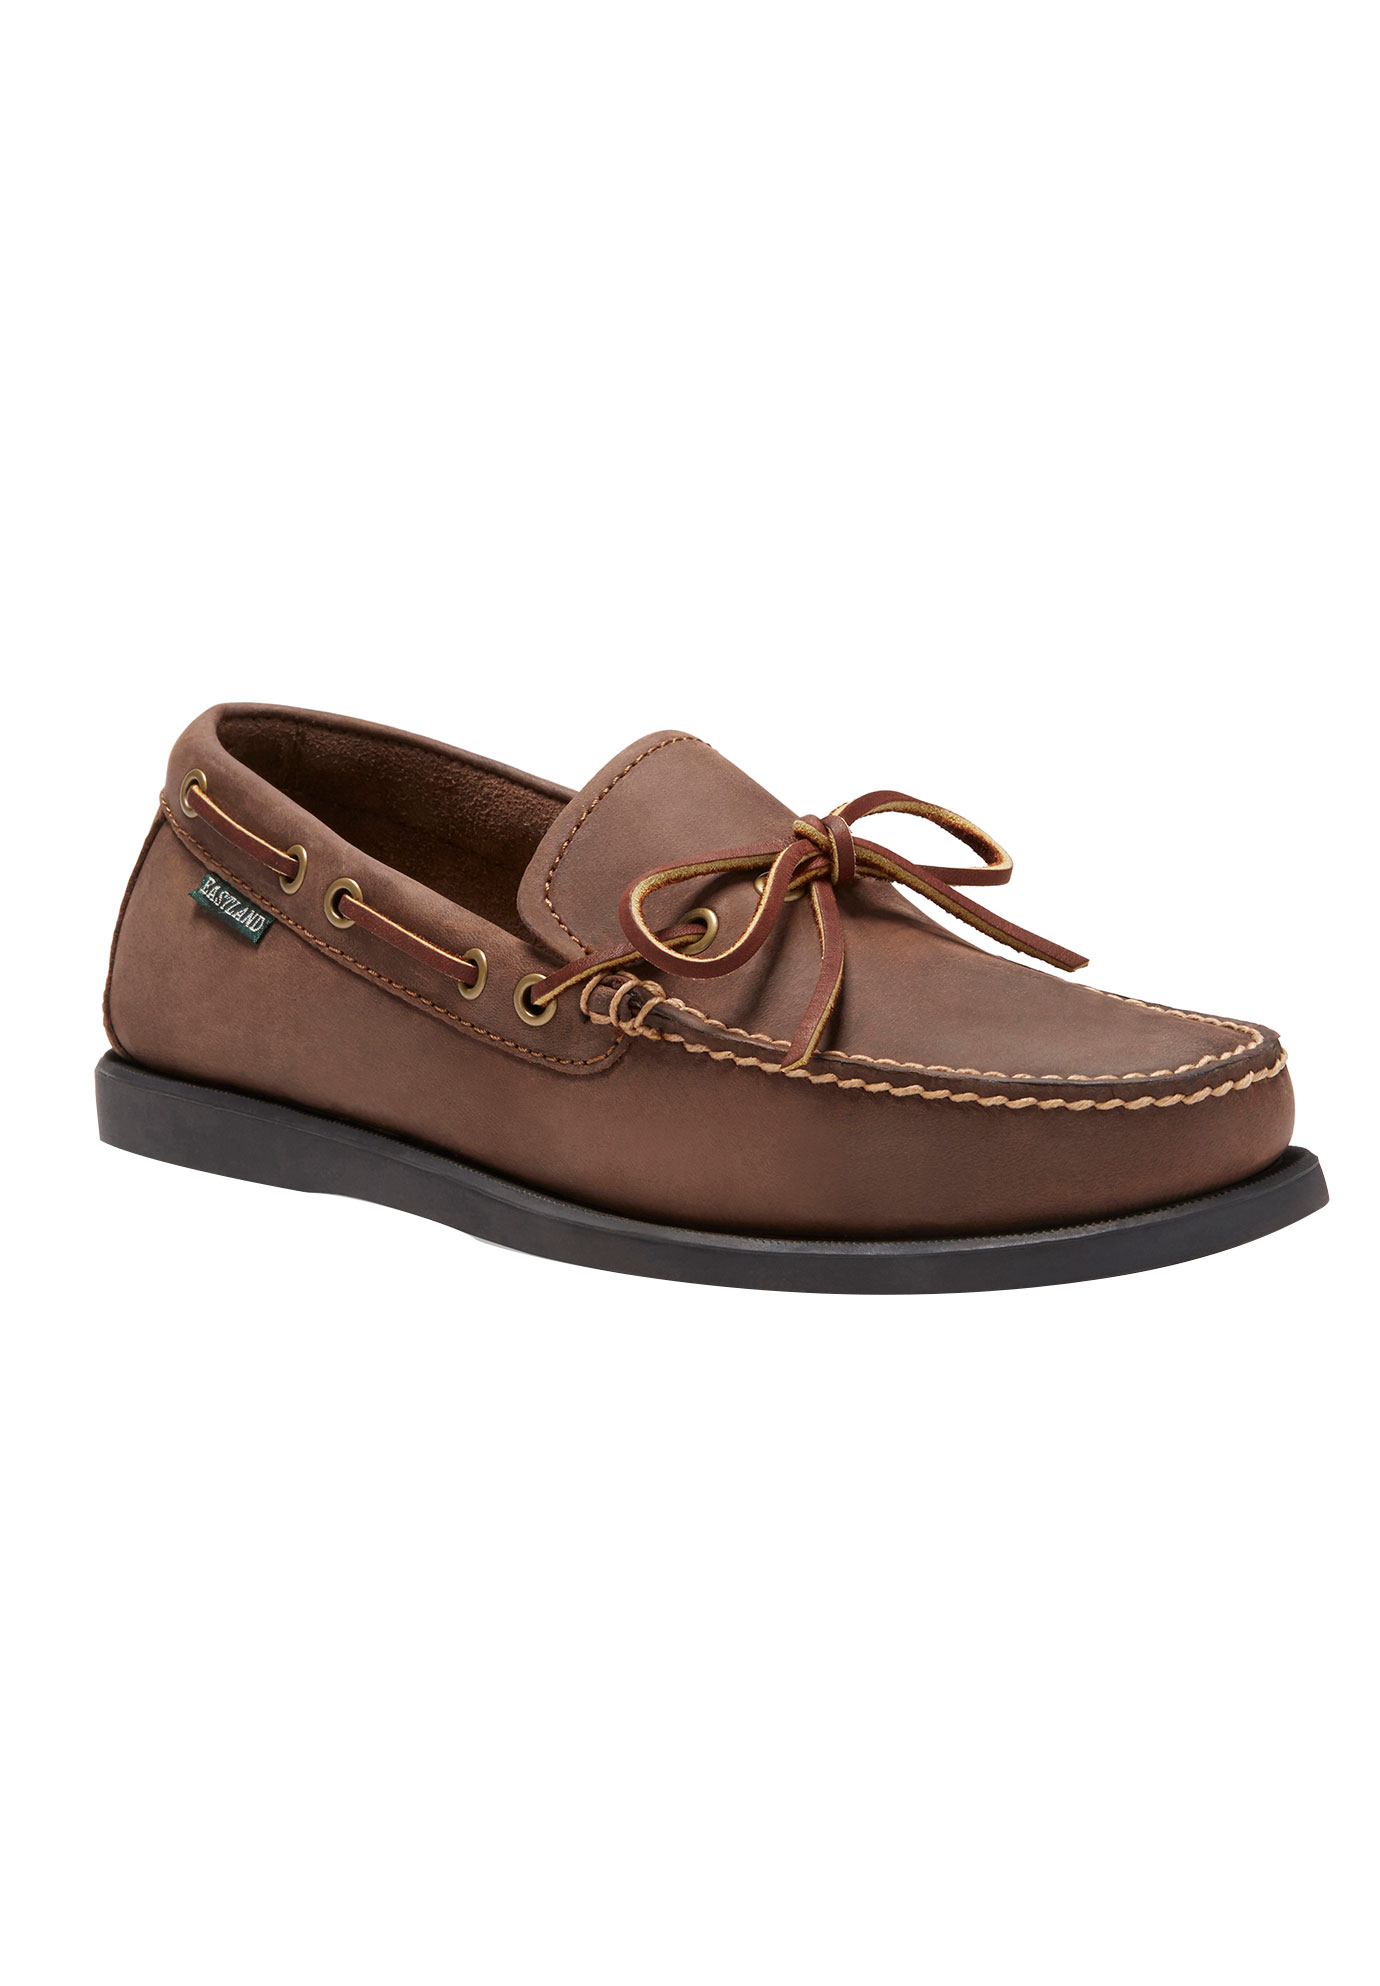 Yarmouth Camp Moc Slip-Ons by Eastland®, 